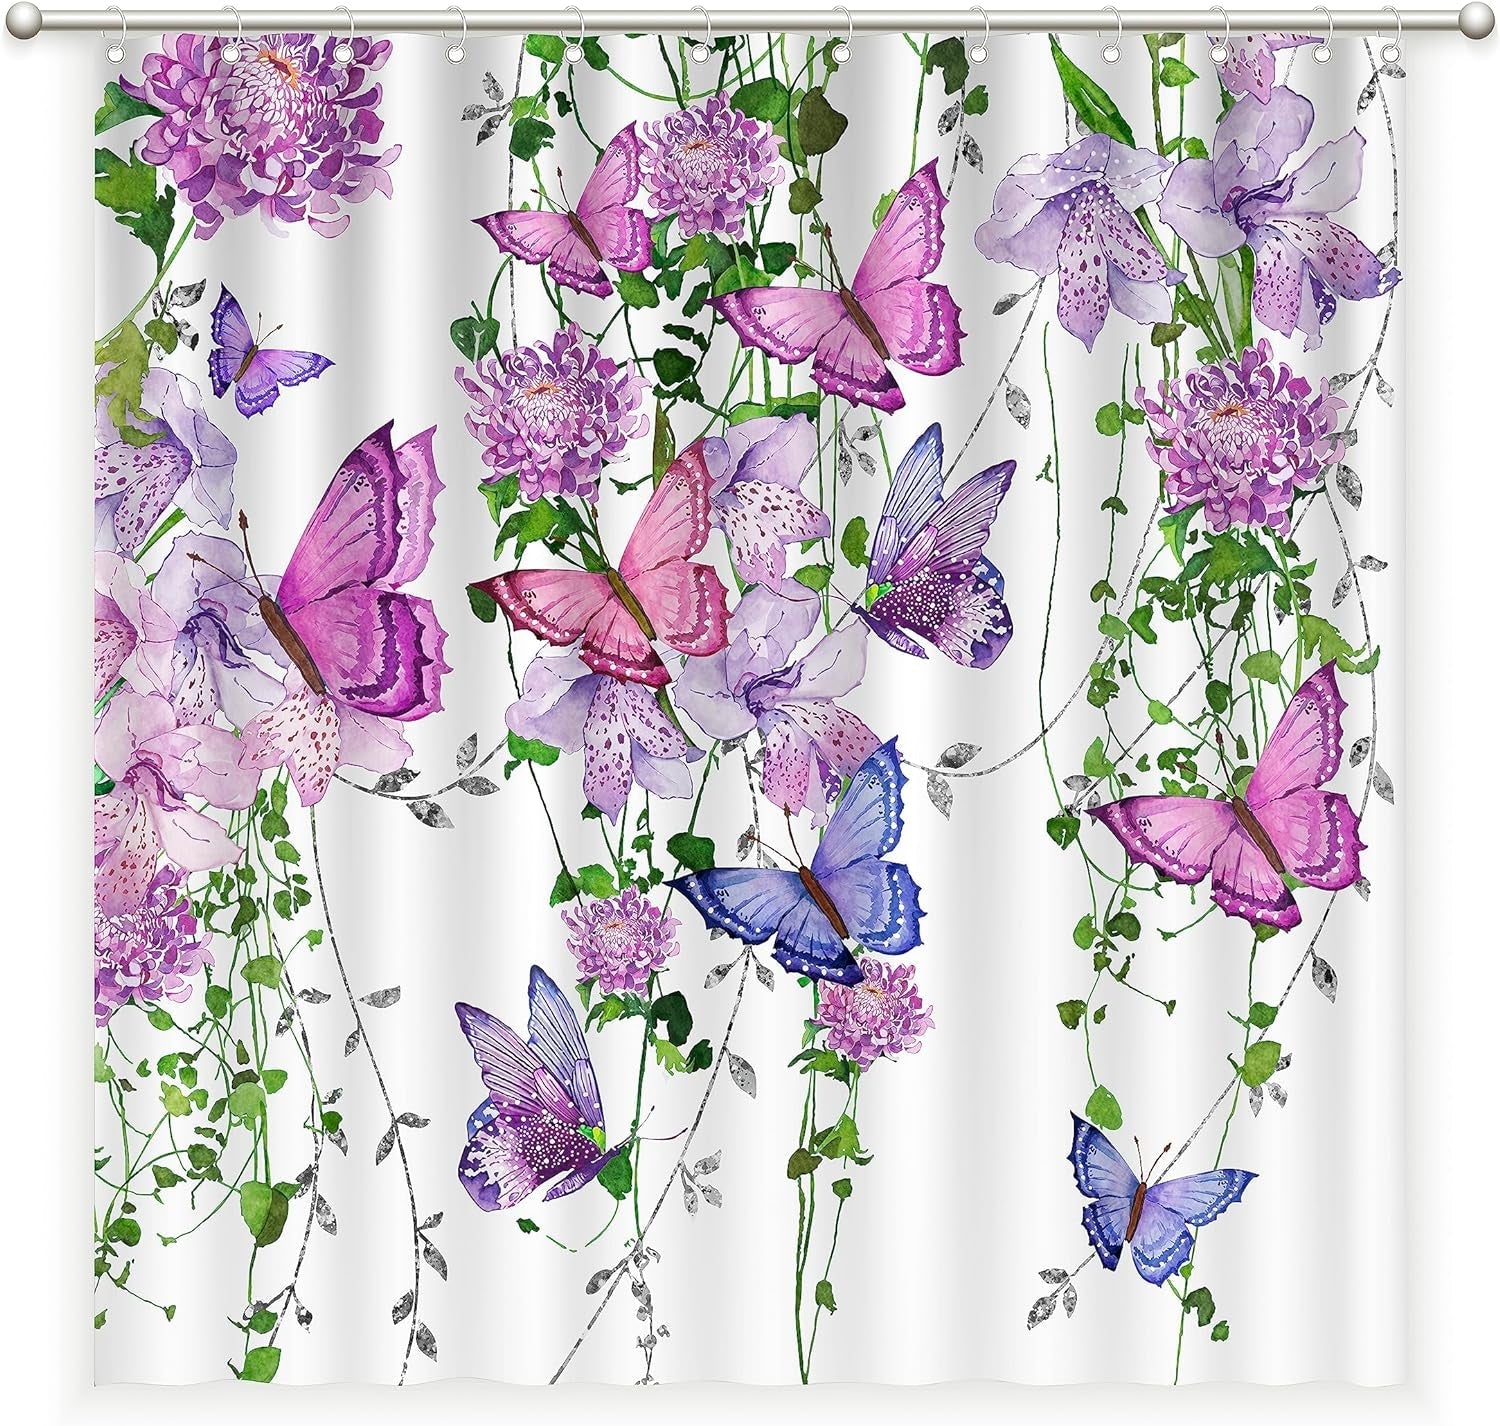 Chiinvent Purple Shower Curtain Butterfly Shower Curtains for Bathroom, Spring Shower Curtain Lavender Lilac Pink Floral Shower Curtain with 12 Hooks, Machine Washable Waterproof Fabric, 72X72 Inches